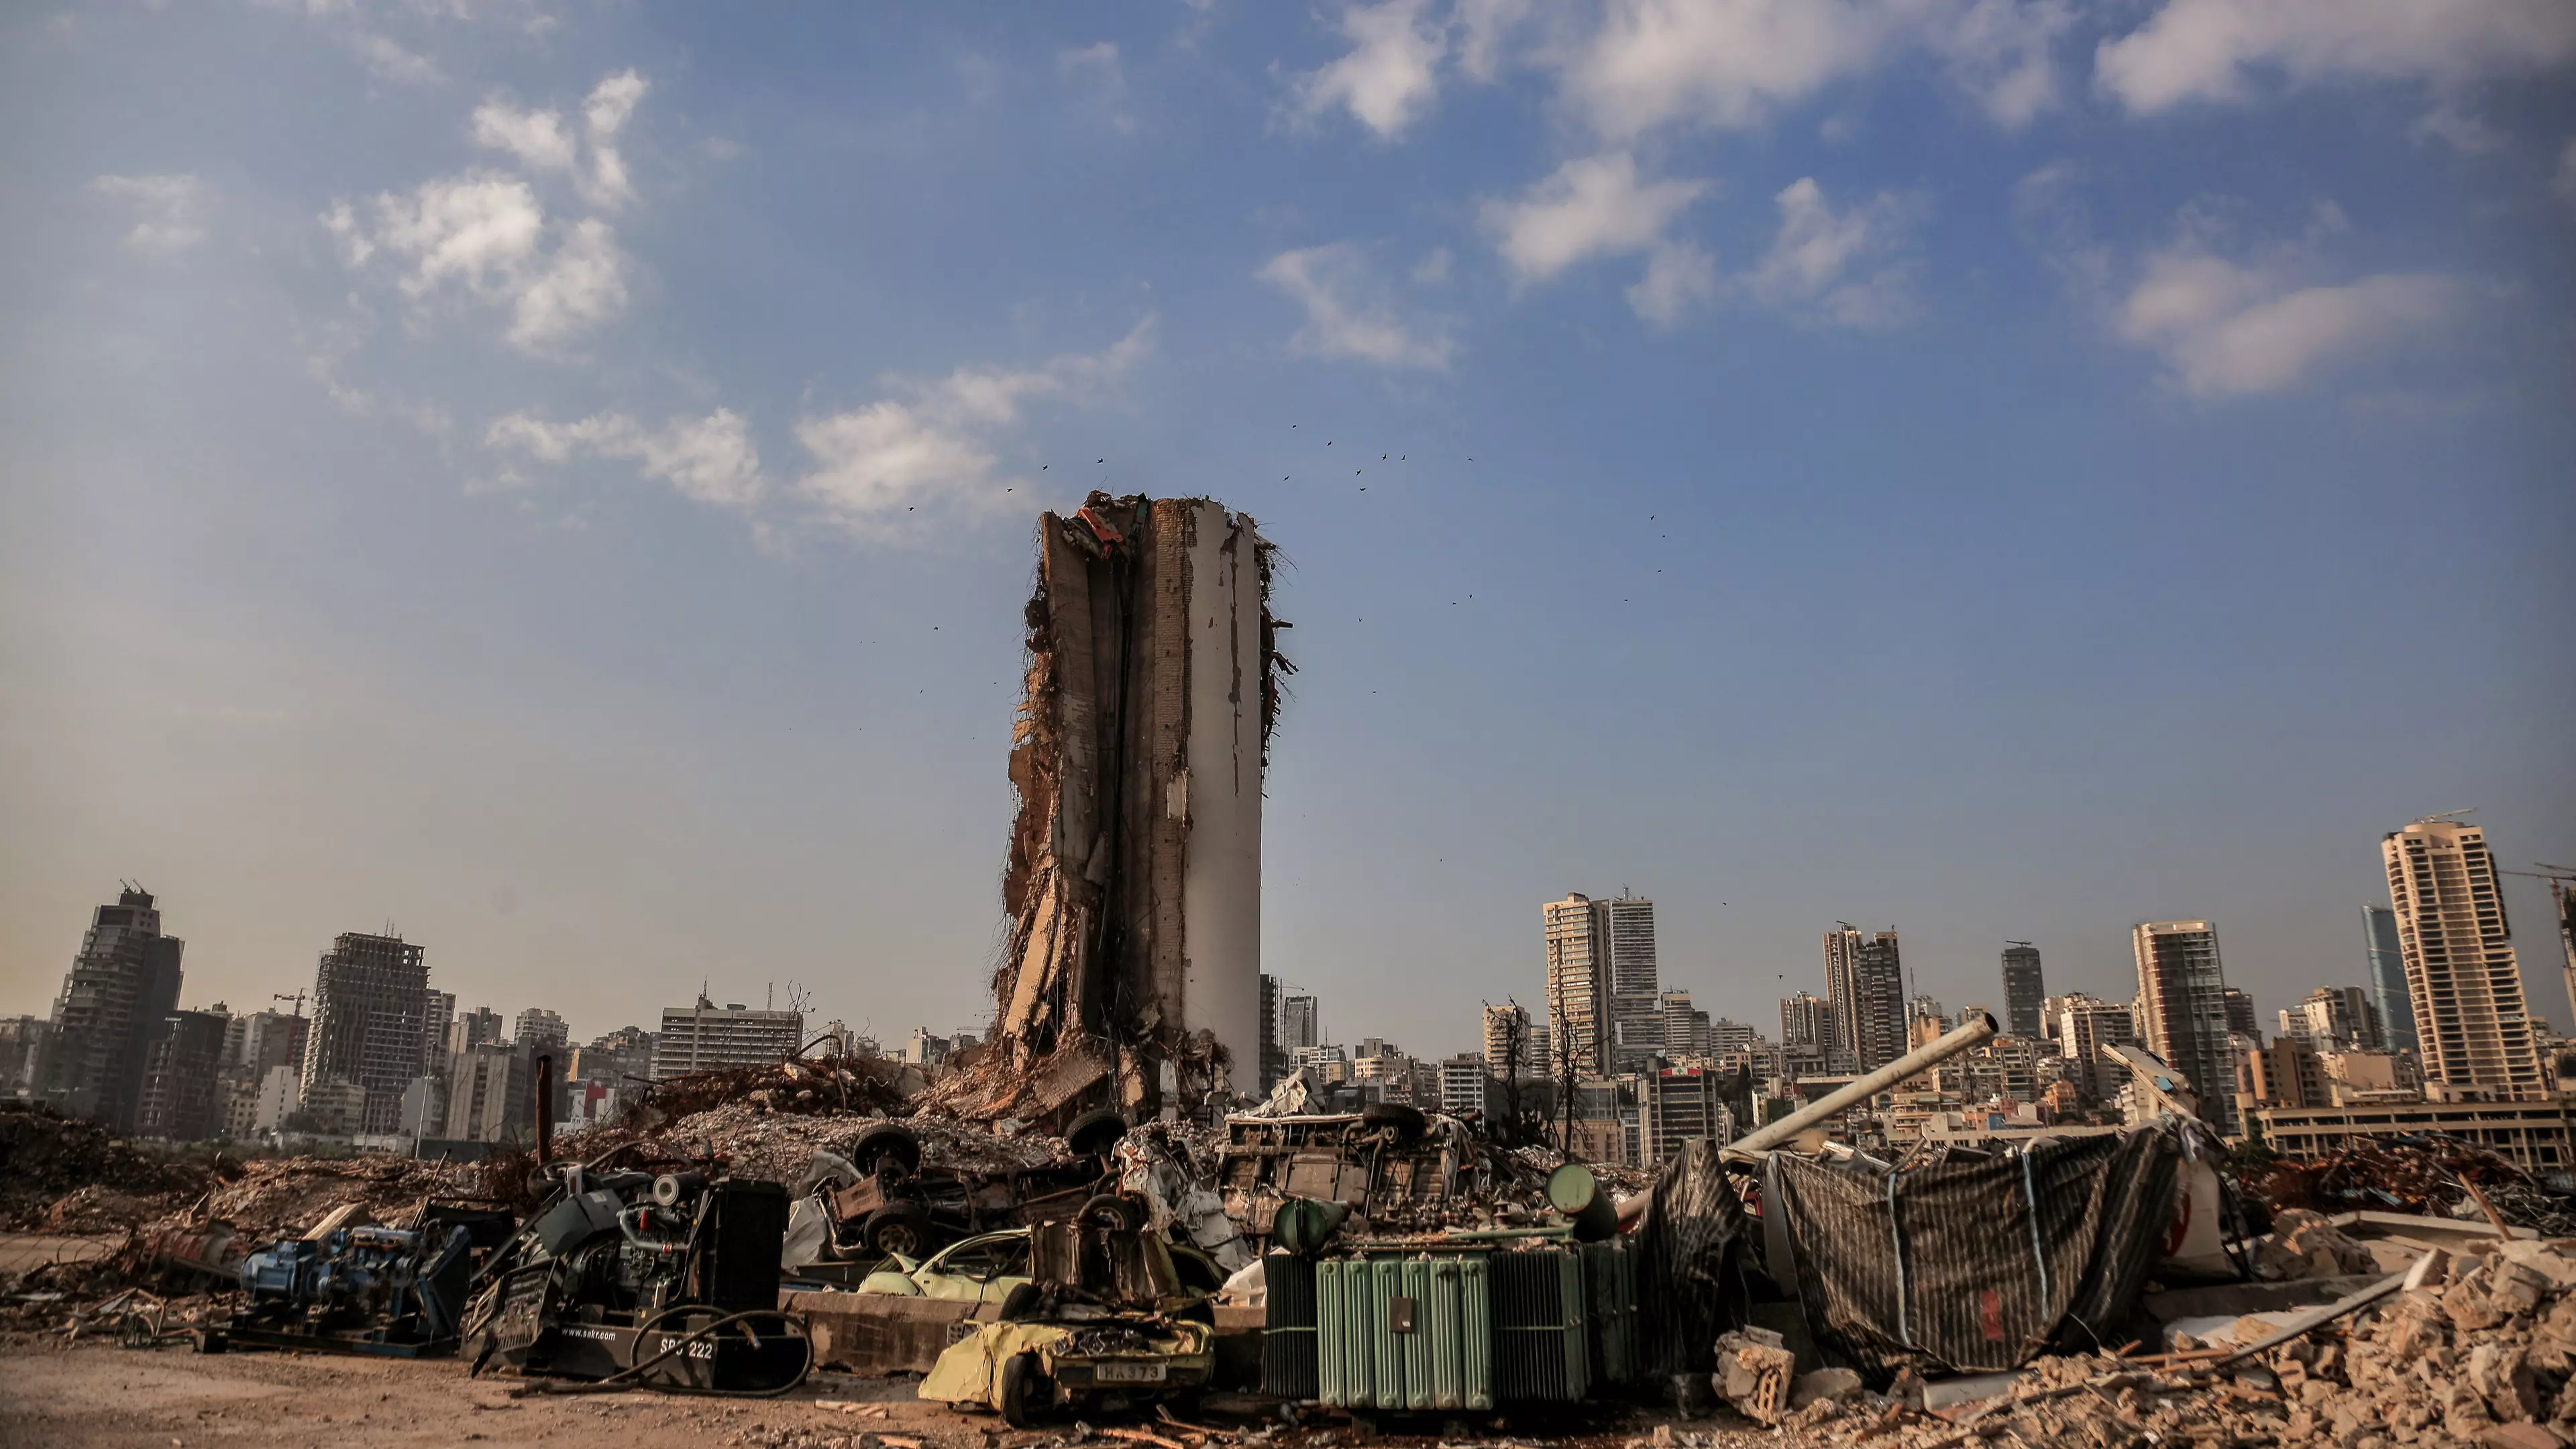 ​It's Been One Year Since Huge Explosion Caused Devastation In Beirut